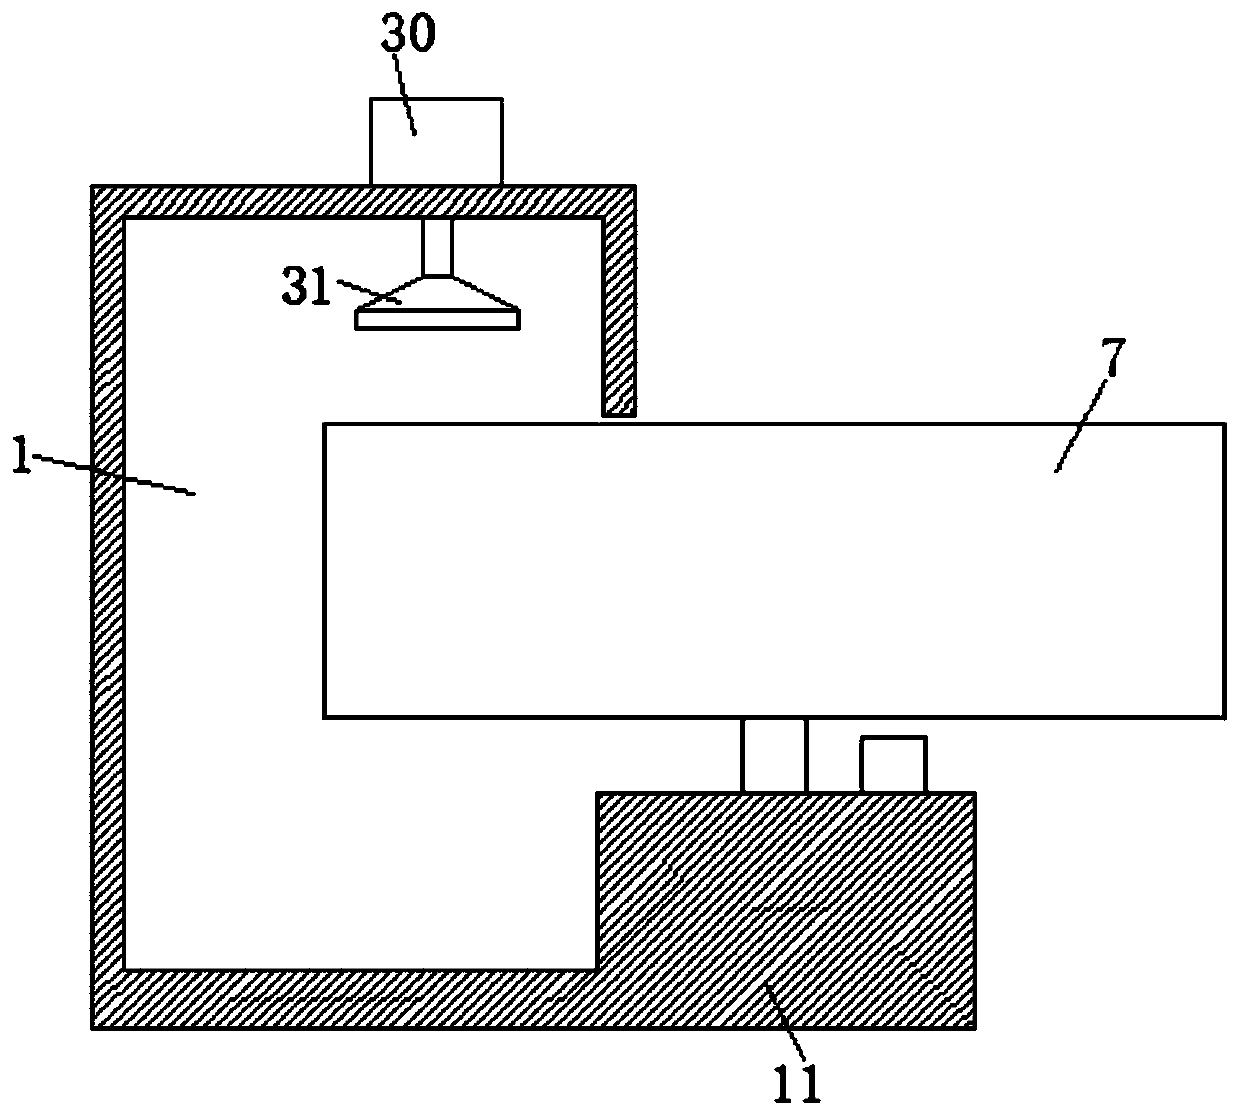 Processing device for third-generation semiconductor material